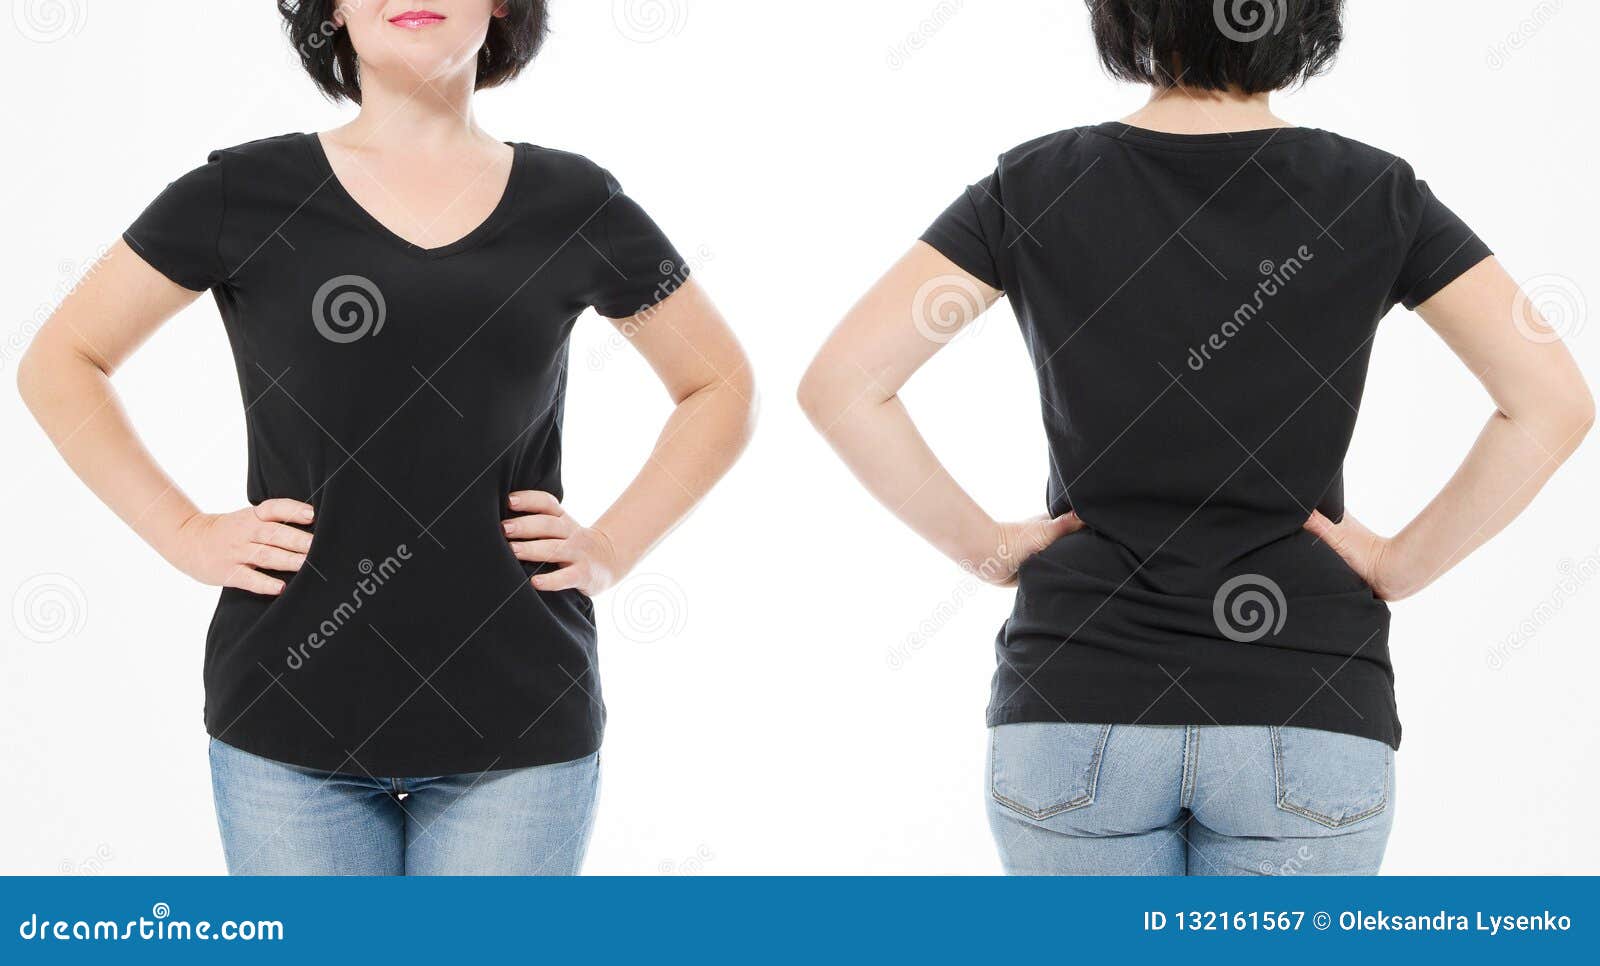 Women Black Blank T Shirt Front And Back Rear View Isolated On